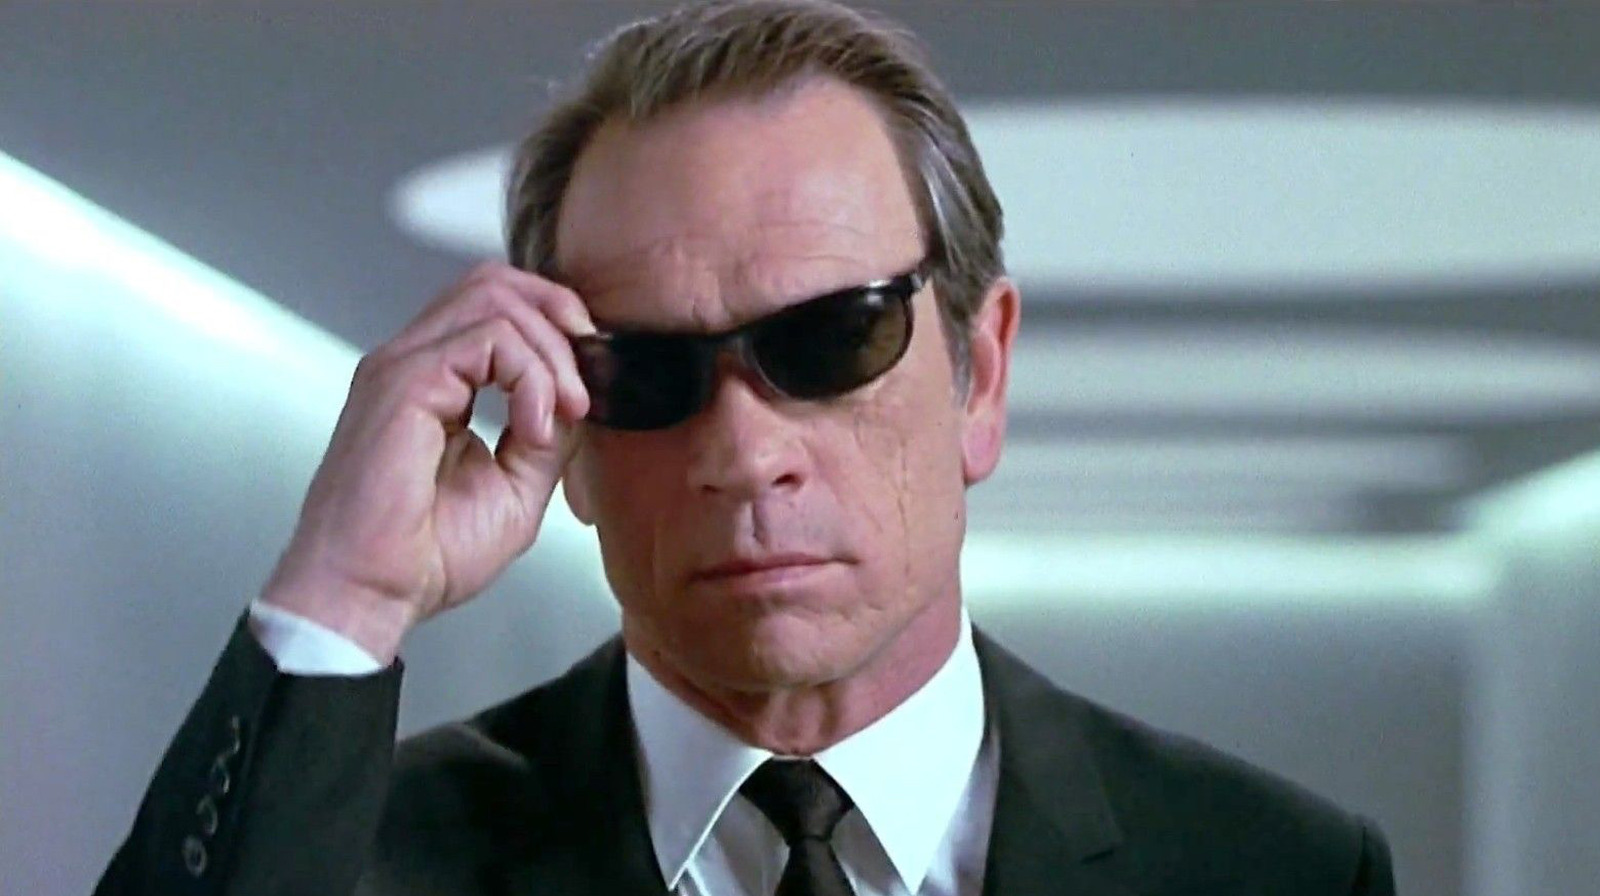 Casting Tommy Lee Jones Caused Some BehindTheScenes Headaches For Men